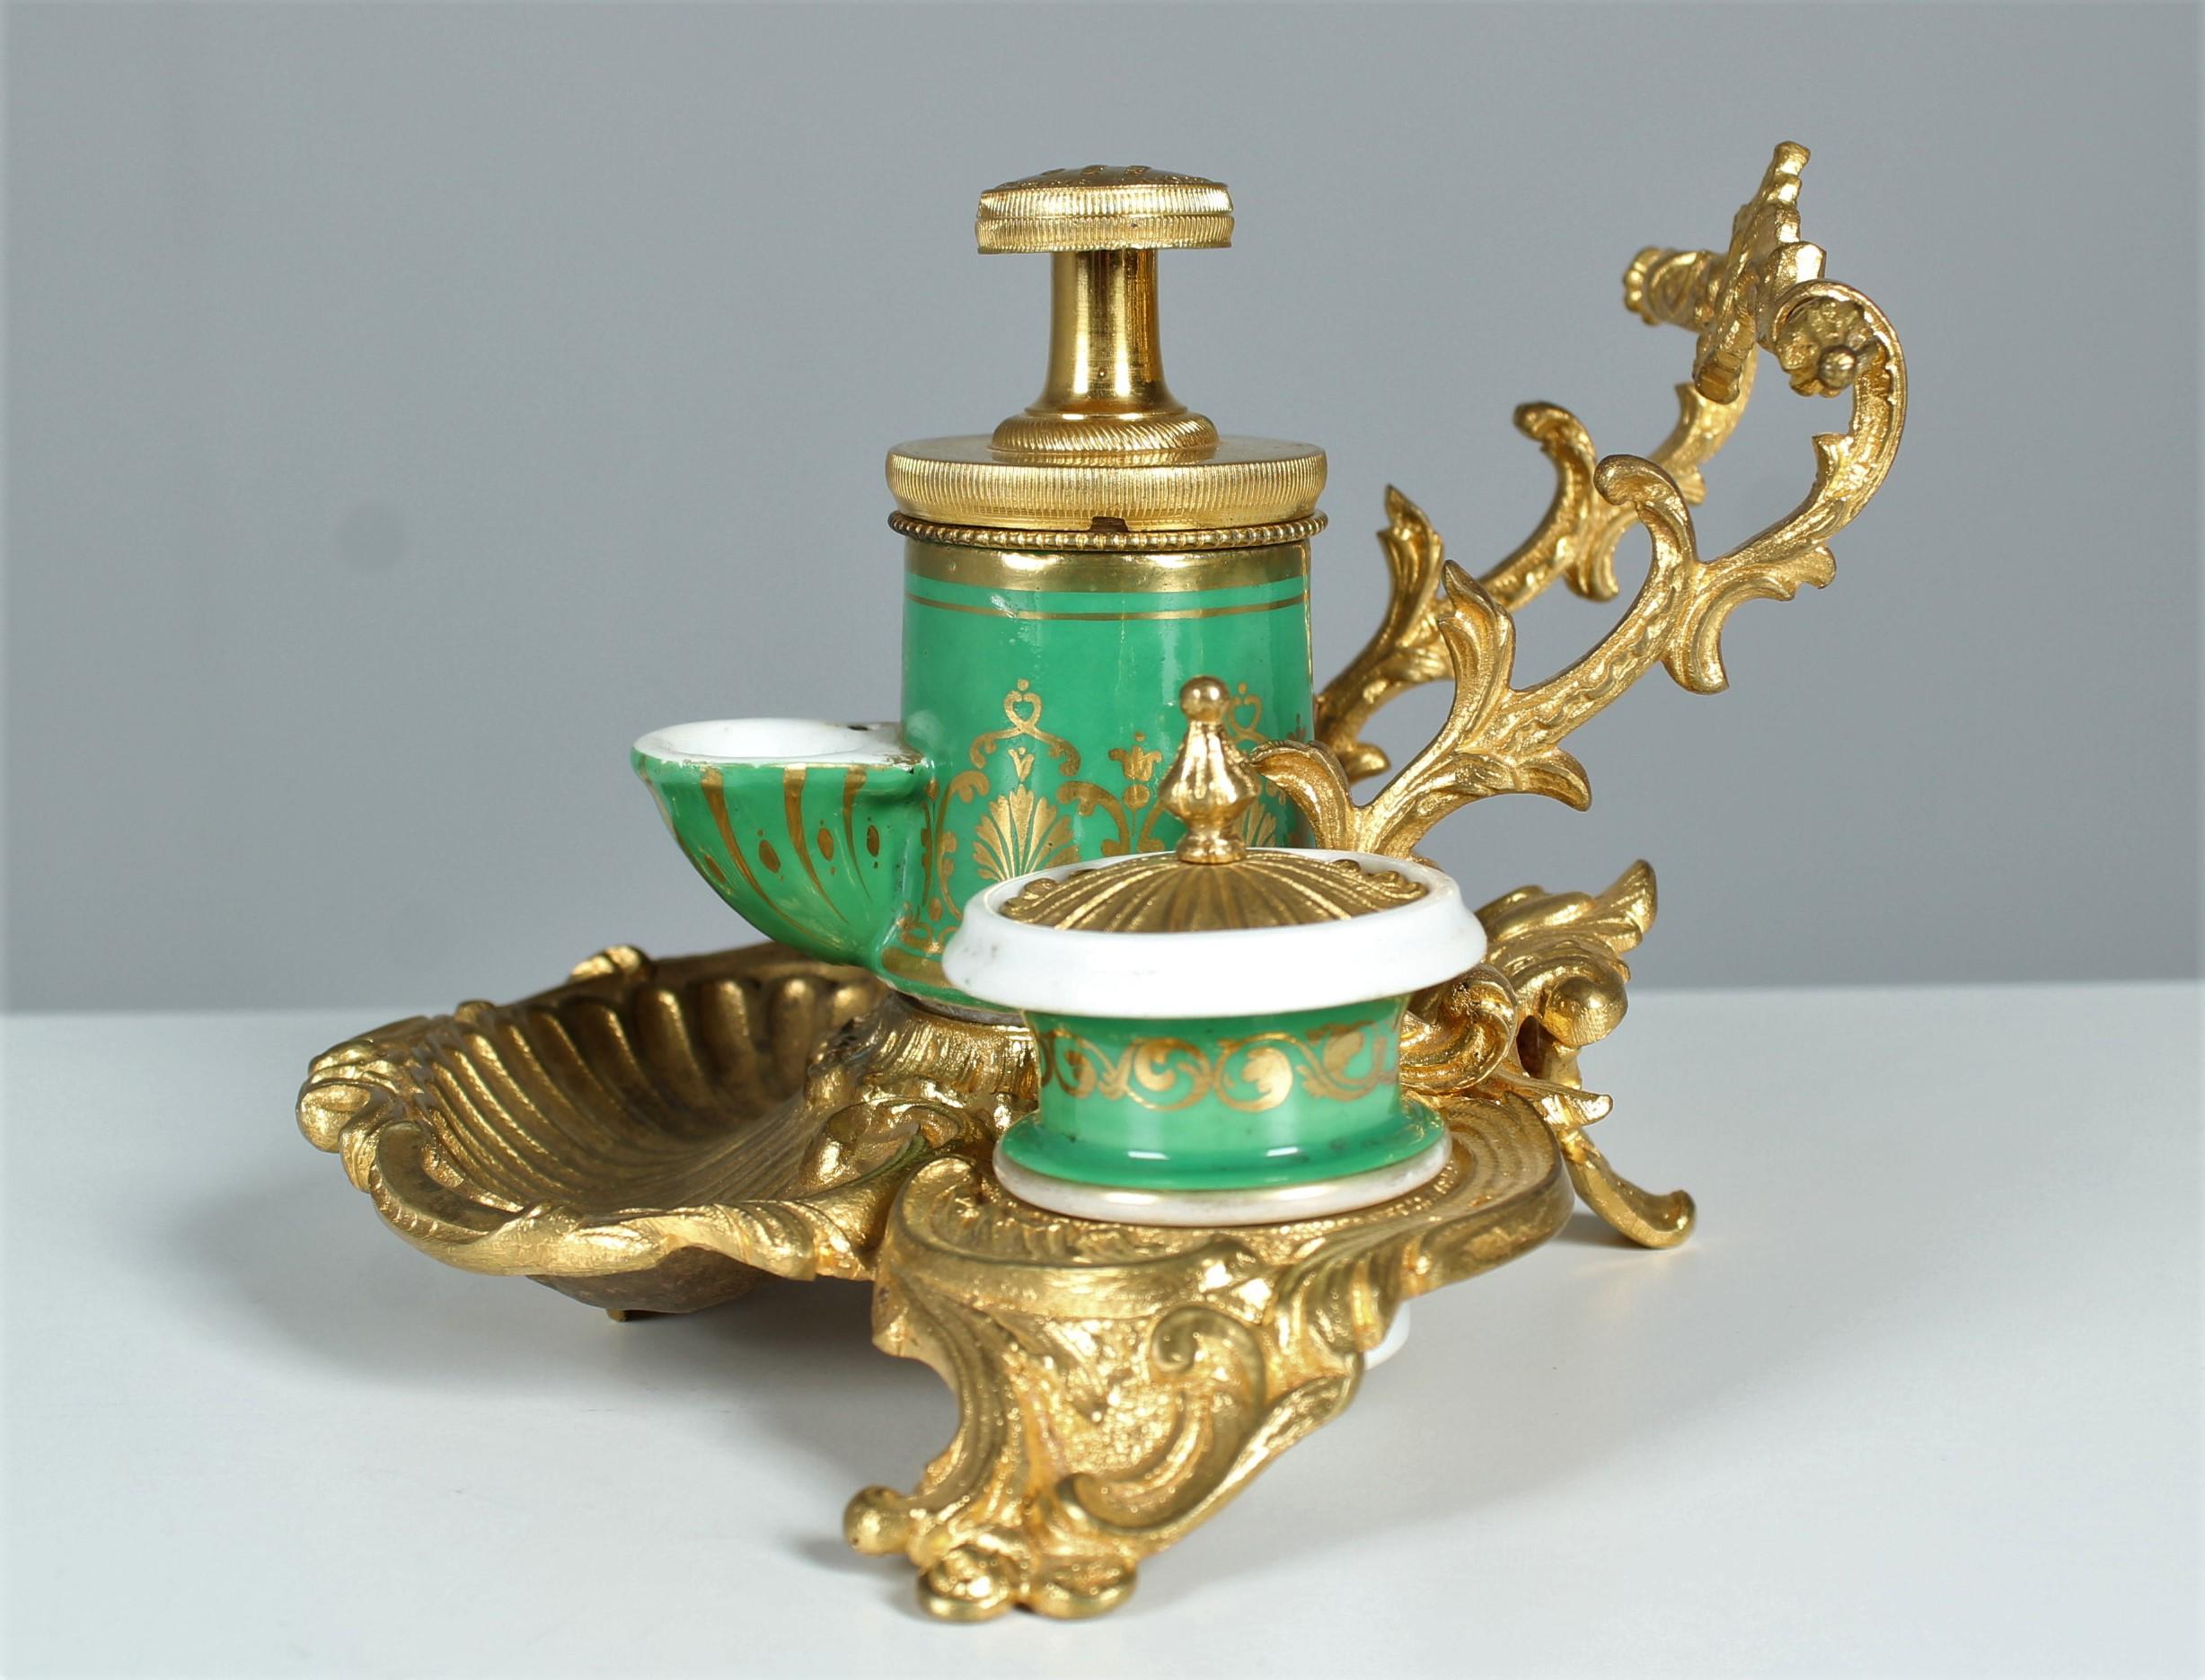 Exceptional antique Inkwell with rich bronze ornaments and three ceramic vessels.
The ink jars are painted in a beautiful rich green and embellished with gold colour.
France, circa 1880.




